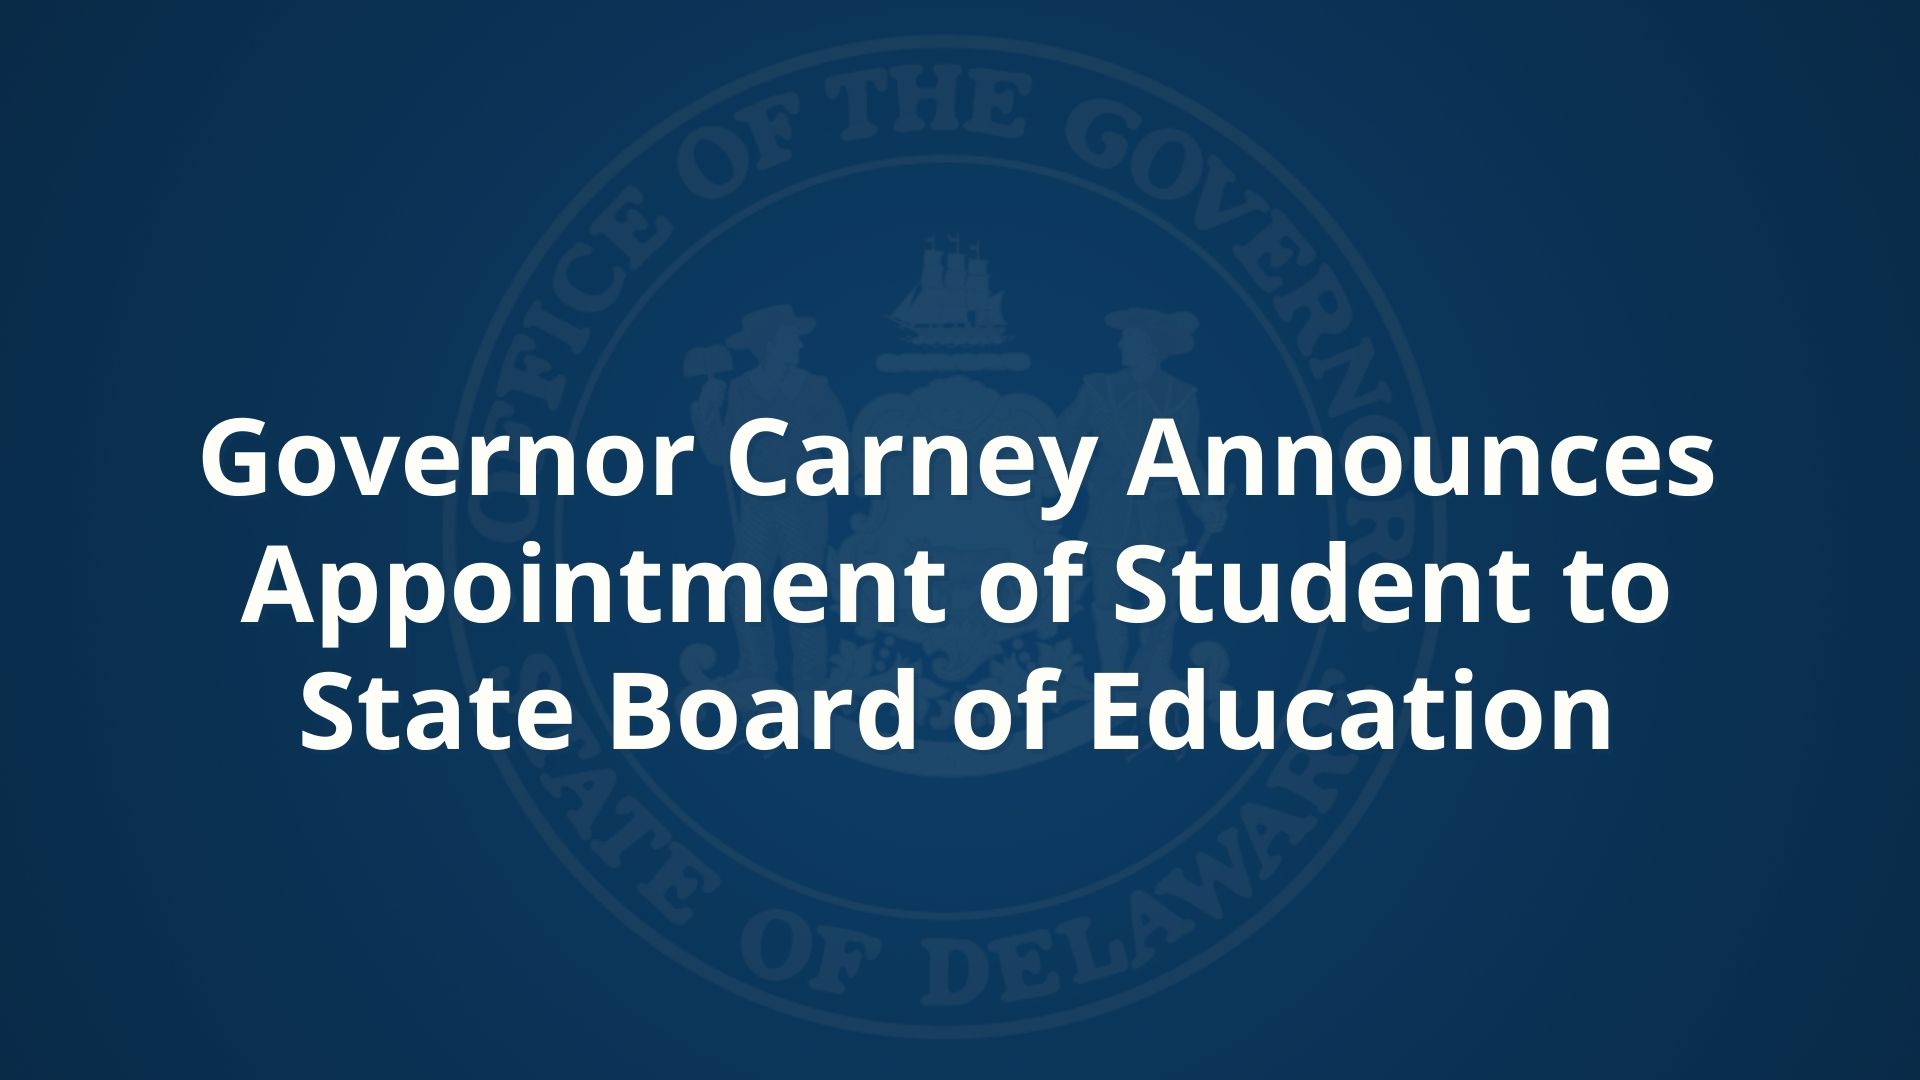 Governor Carney Announces Appointment of Student to State Board of Education